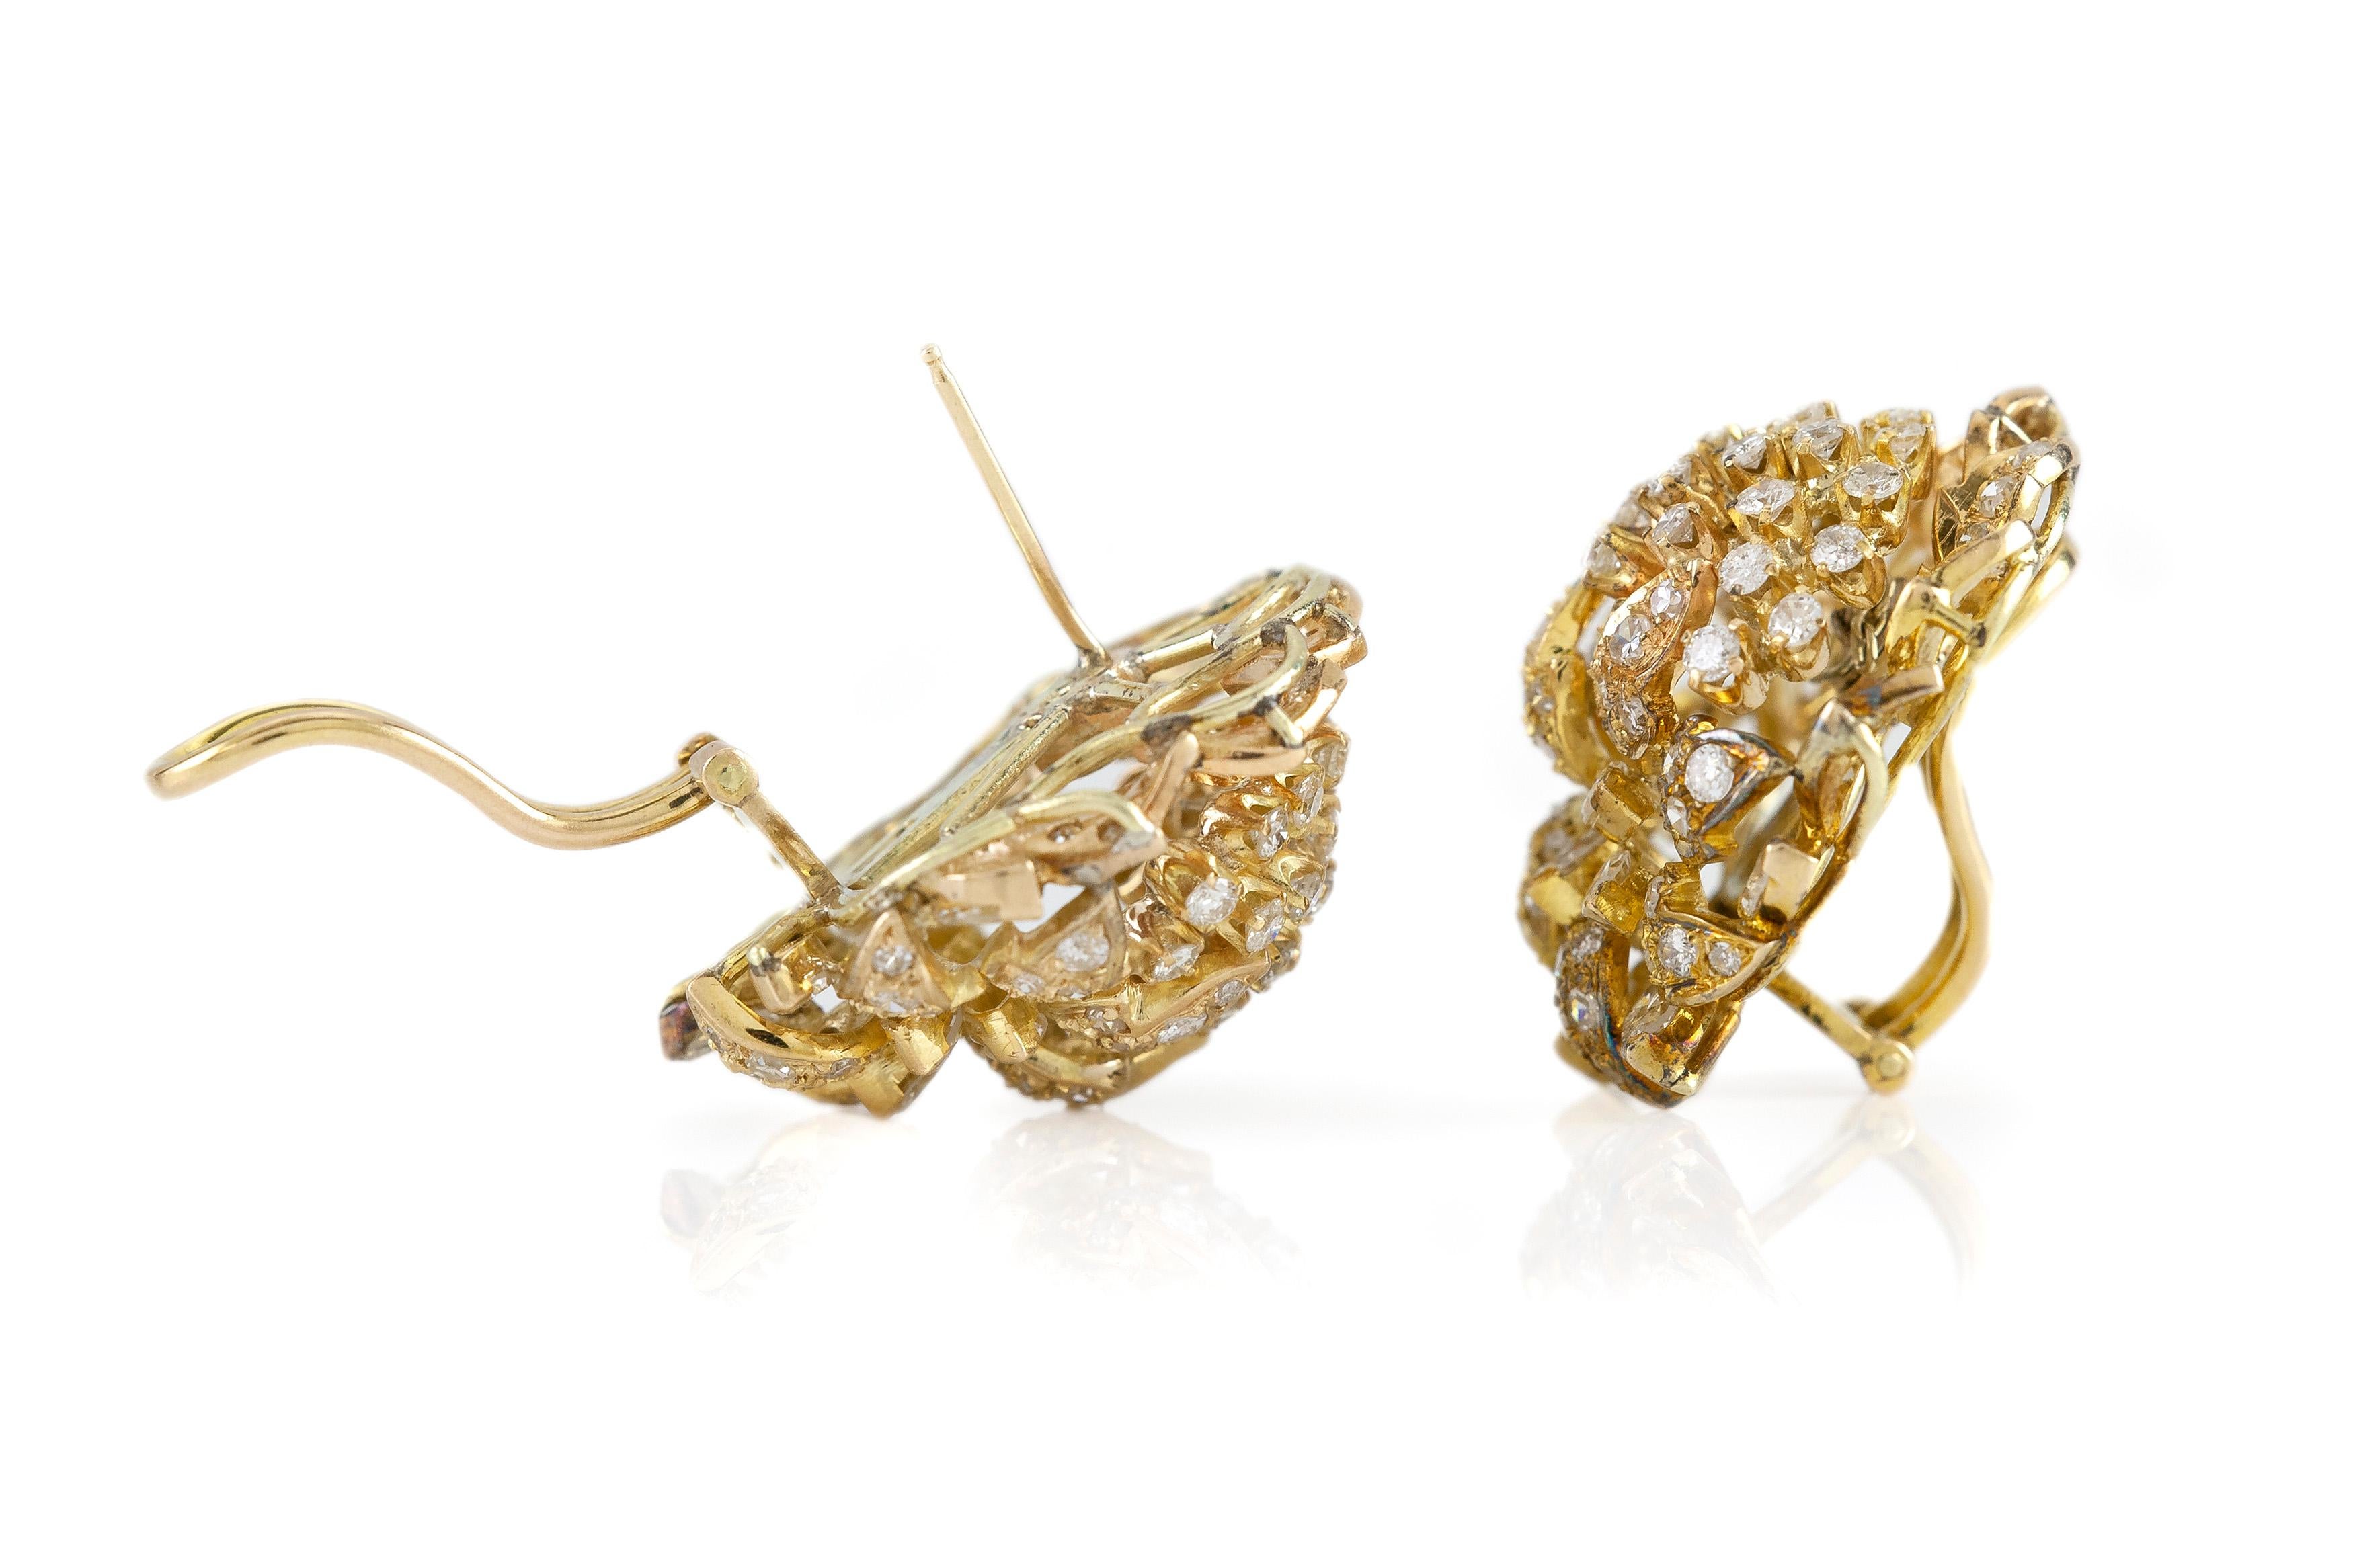 The earrings is finely crafted in 14k yellow gold with diamonds weighing approximately total of 5.00 carat.